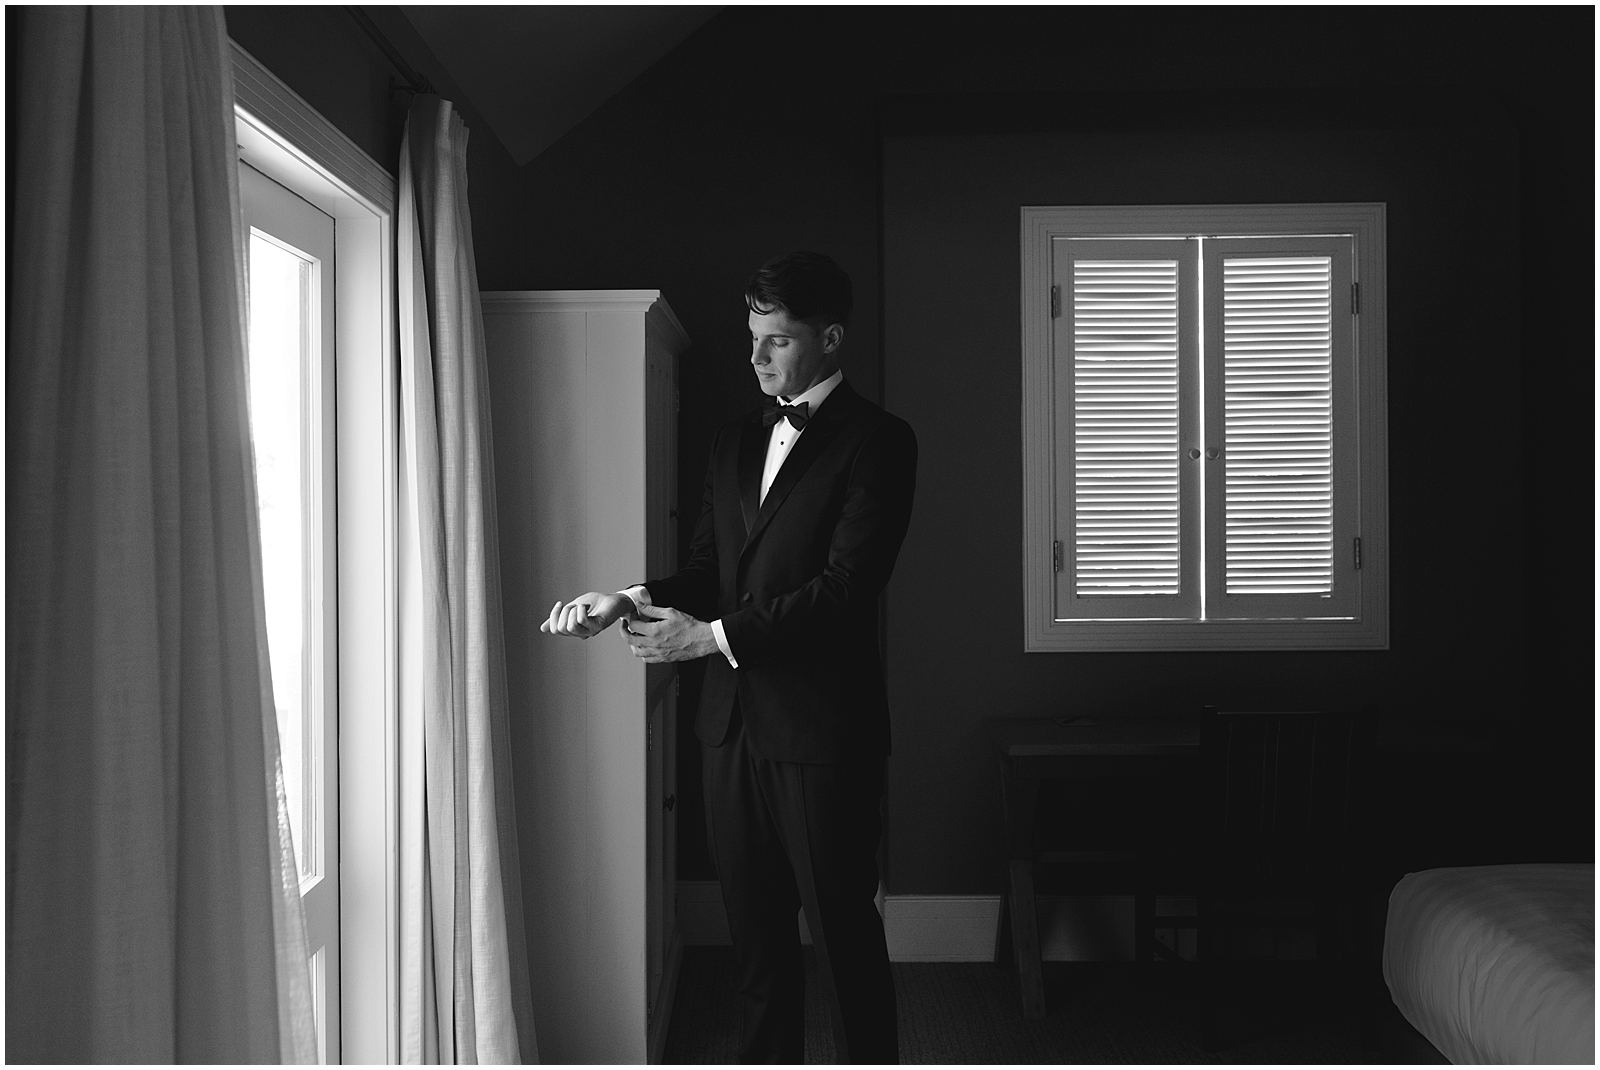 Charlotte Kiri Photography - Wedding Photography of a groom doing up his cufflinks as he stands in front of the window of his hotel room before the wedding in Wanaka, New Zealand.